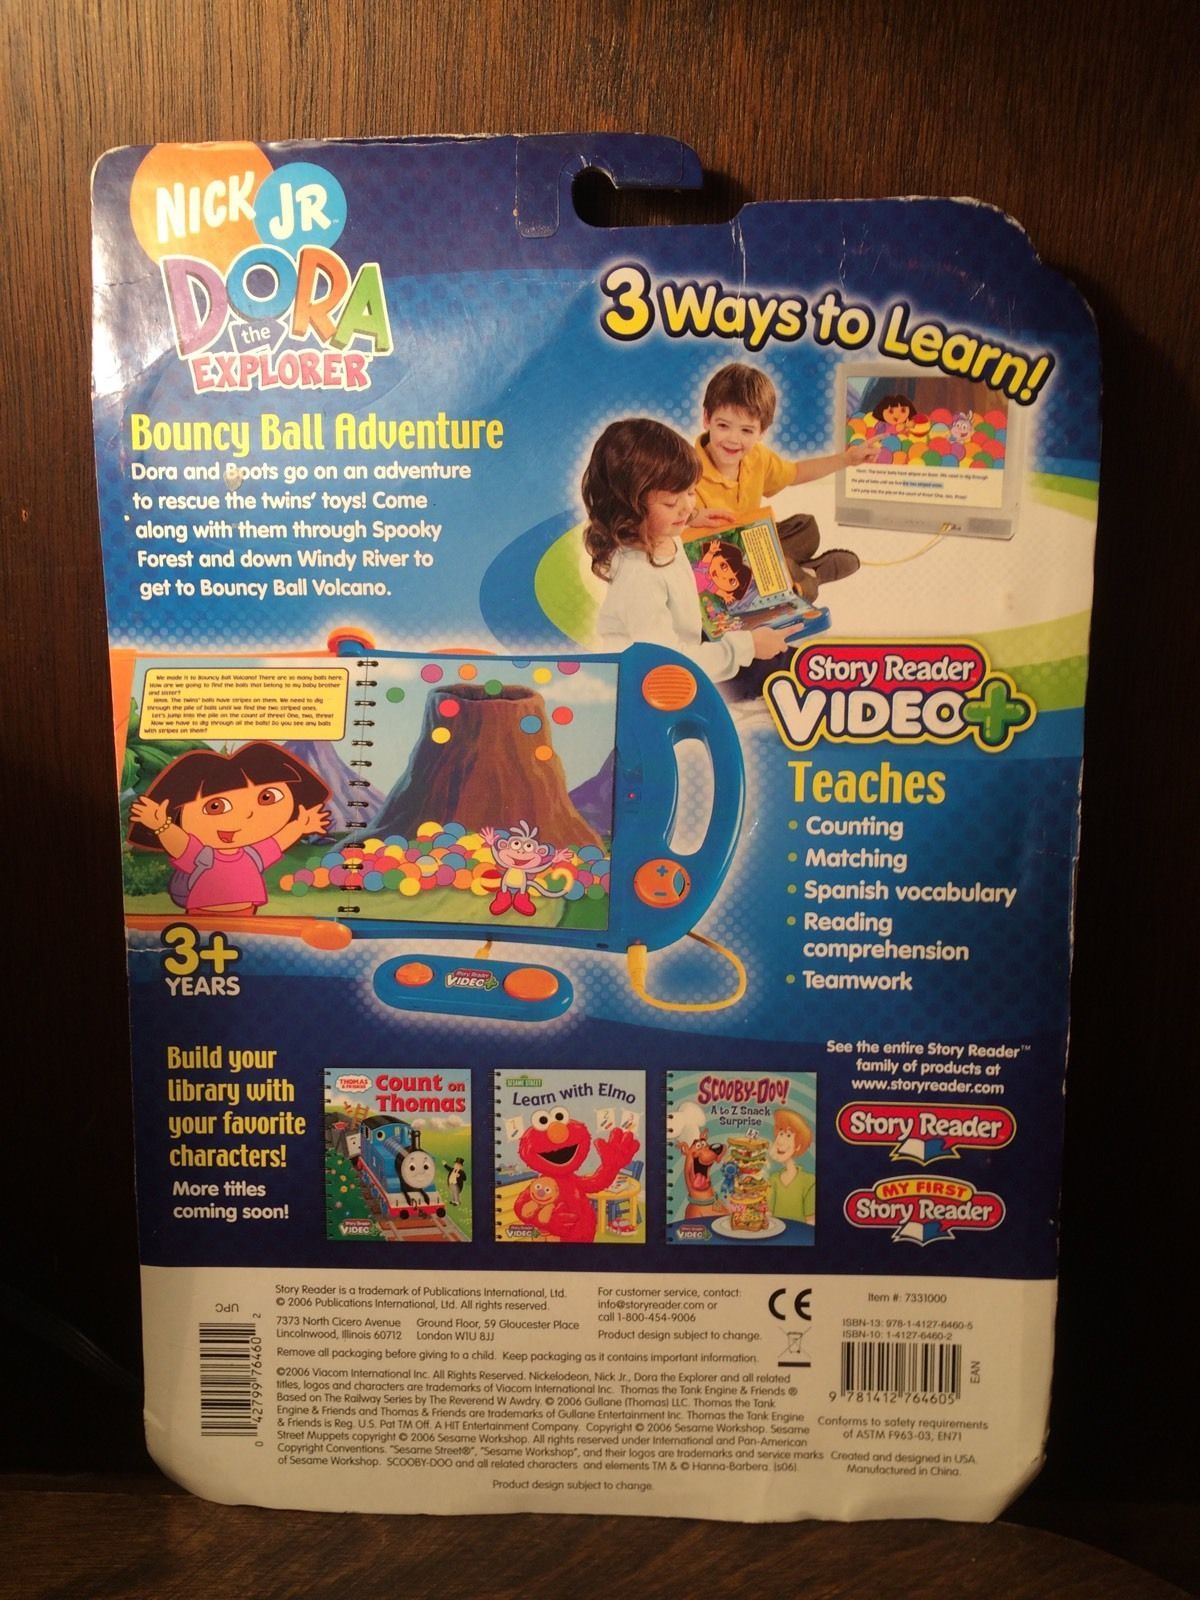 story reader video plus system